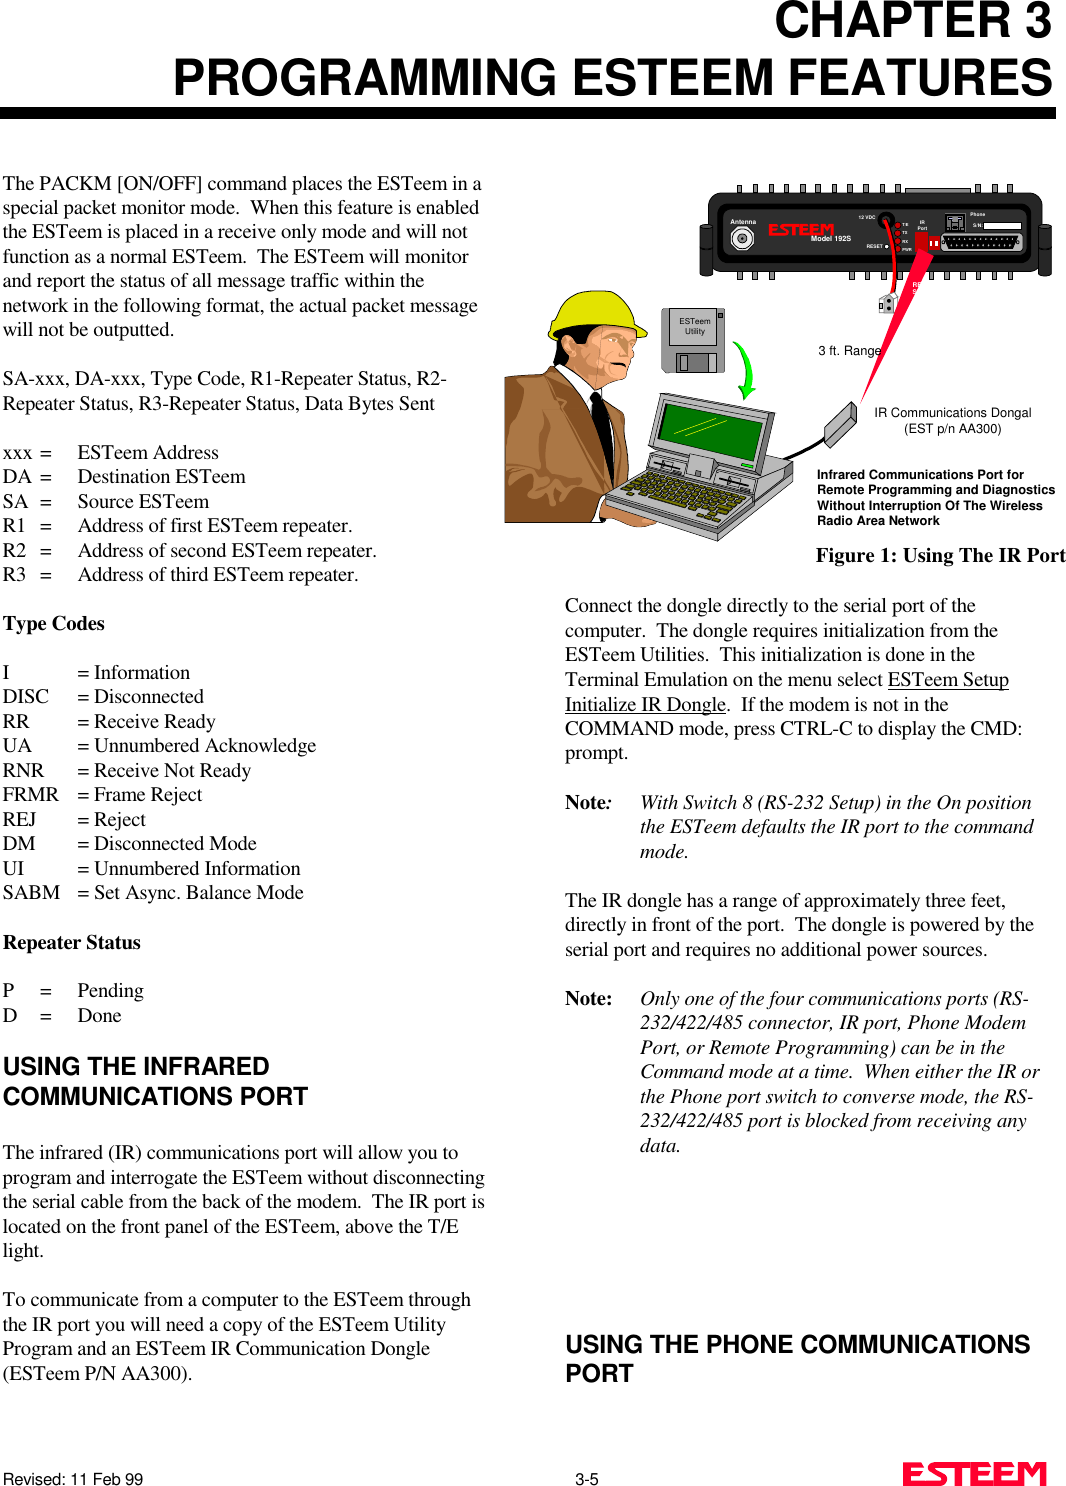 CHAPTER 3PROGRAMMING ESTEEM FEATURESRevised: 11 Feb 99                                                                                                3-5     The PACKM [ON/OFF] command places the ESTeem in aspecial packet monitor mode.  When this feature is enabledthe ESTeem is placed in a receive only mode and will notfunction as a normal ESTeem.  The ESTeem will monitorand report the status of all message traffic within thenetwork in the following format, the actual packet messagewill not be outputted.SA-xxx, DA-xxx, Type Code, R1-Repeater Status, R2-Repeater Status, R3-Repeater Status, Data Bytes Sentxxx = ESTeem AddressDA = Destination ESTeemSA = Source ESTeemR1 = Address of first ESTeem repeater.R2 = Address of second ESTeem repeater.R3 = Address of third ESTeem repeater.Type CodesI = InformationDISC = DisconnectedRR = Receive ReadyUA  = Unnumbered AcknowledgeRNR  = Receive Not ReadyFRMR  = Frame RejectREJ = RejectDM  = Disconnected ModeUI   = Unnumbered InformationSABM  = Set Async. Balance ModeRepeater StatusP=PendingD= DoneUSING THE INFRAREDCOMMUNICATIONS PORTThe infrared (IR) communications port will allow you toprogram and interrogate the ESTeem without disconnectingthe serial cable from the back of the modem.  The IR port islocated on the front panel of the ESTeem, above the T/Elight.To communicate from a computer to the ESTeem throughthe IR port you will need a copy of the ESTeem UtilityProgram and an ESTeem IR Communication Dongle(ESTeem P/N AA300).Connect the dongle directly to the serial port of thecomputer.  The dongle requires initialization from theESTeem Utilities.  This initialization is done in theTerminal Emulation on the menu select ESTeem SetupInitialize IR Dongle.  If the modem is not in theCOMMAND mode, press CTRL-C to display the CMD:prompt.Note:With Switch 8 (RS-232 Setup) in the On positionthe ESTeem defaults the IR port to the commandmode.The IR dongle has a range of approximately three feet,directly in front of the port.  The dongle is powered by theserial port and requires no additional power sources.Note: Only one of the four communications ports (RS-232/422/485 connector, IR port, Phone ModemPort, or Remote Programming) can be in theCommand mode at a time.  When either the IR orthe Phone port switch to converse mode, the RS-232/422/485 port is blocked from receiving anydata.USING THE PHONE COMMUNICATIONSPORTANTENNAS/N:T/ETXRXPWRIRPortPhoneModel 192SAntenna 12 VDCRESETInfrared Communications Port forRemote Programming and DiagnosticsWithout Interruption Of The WirelessRadio Area NetworkESTeemUtilityIR Communications Dongal(EST p/n AA300)3 ft. RangeRESETFigure 1: Using The IR Port